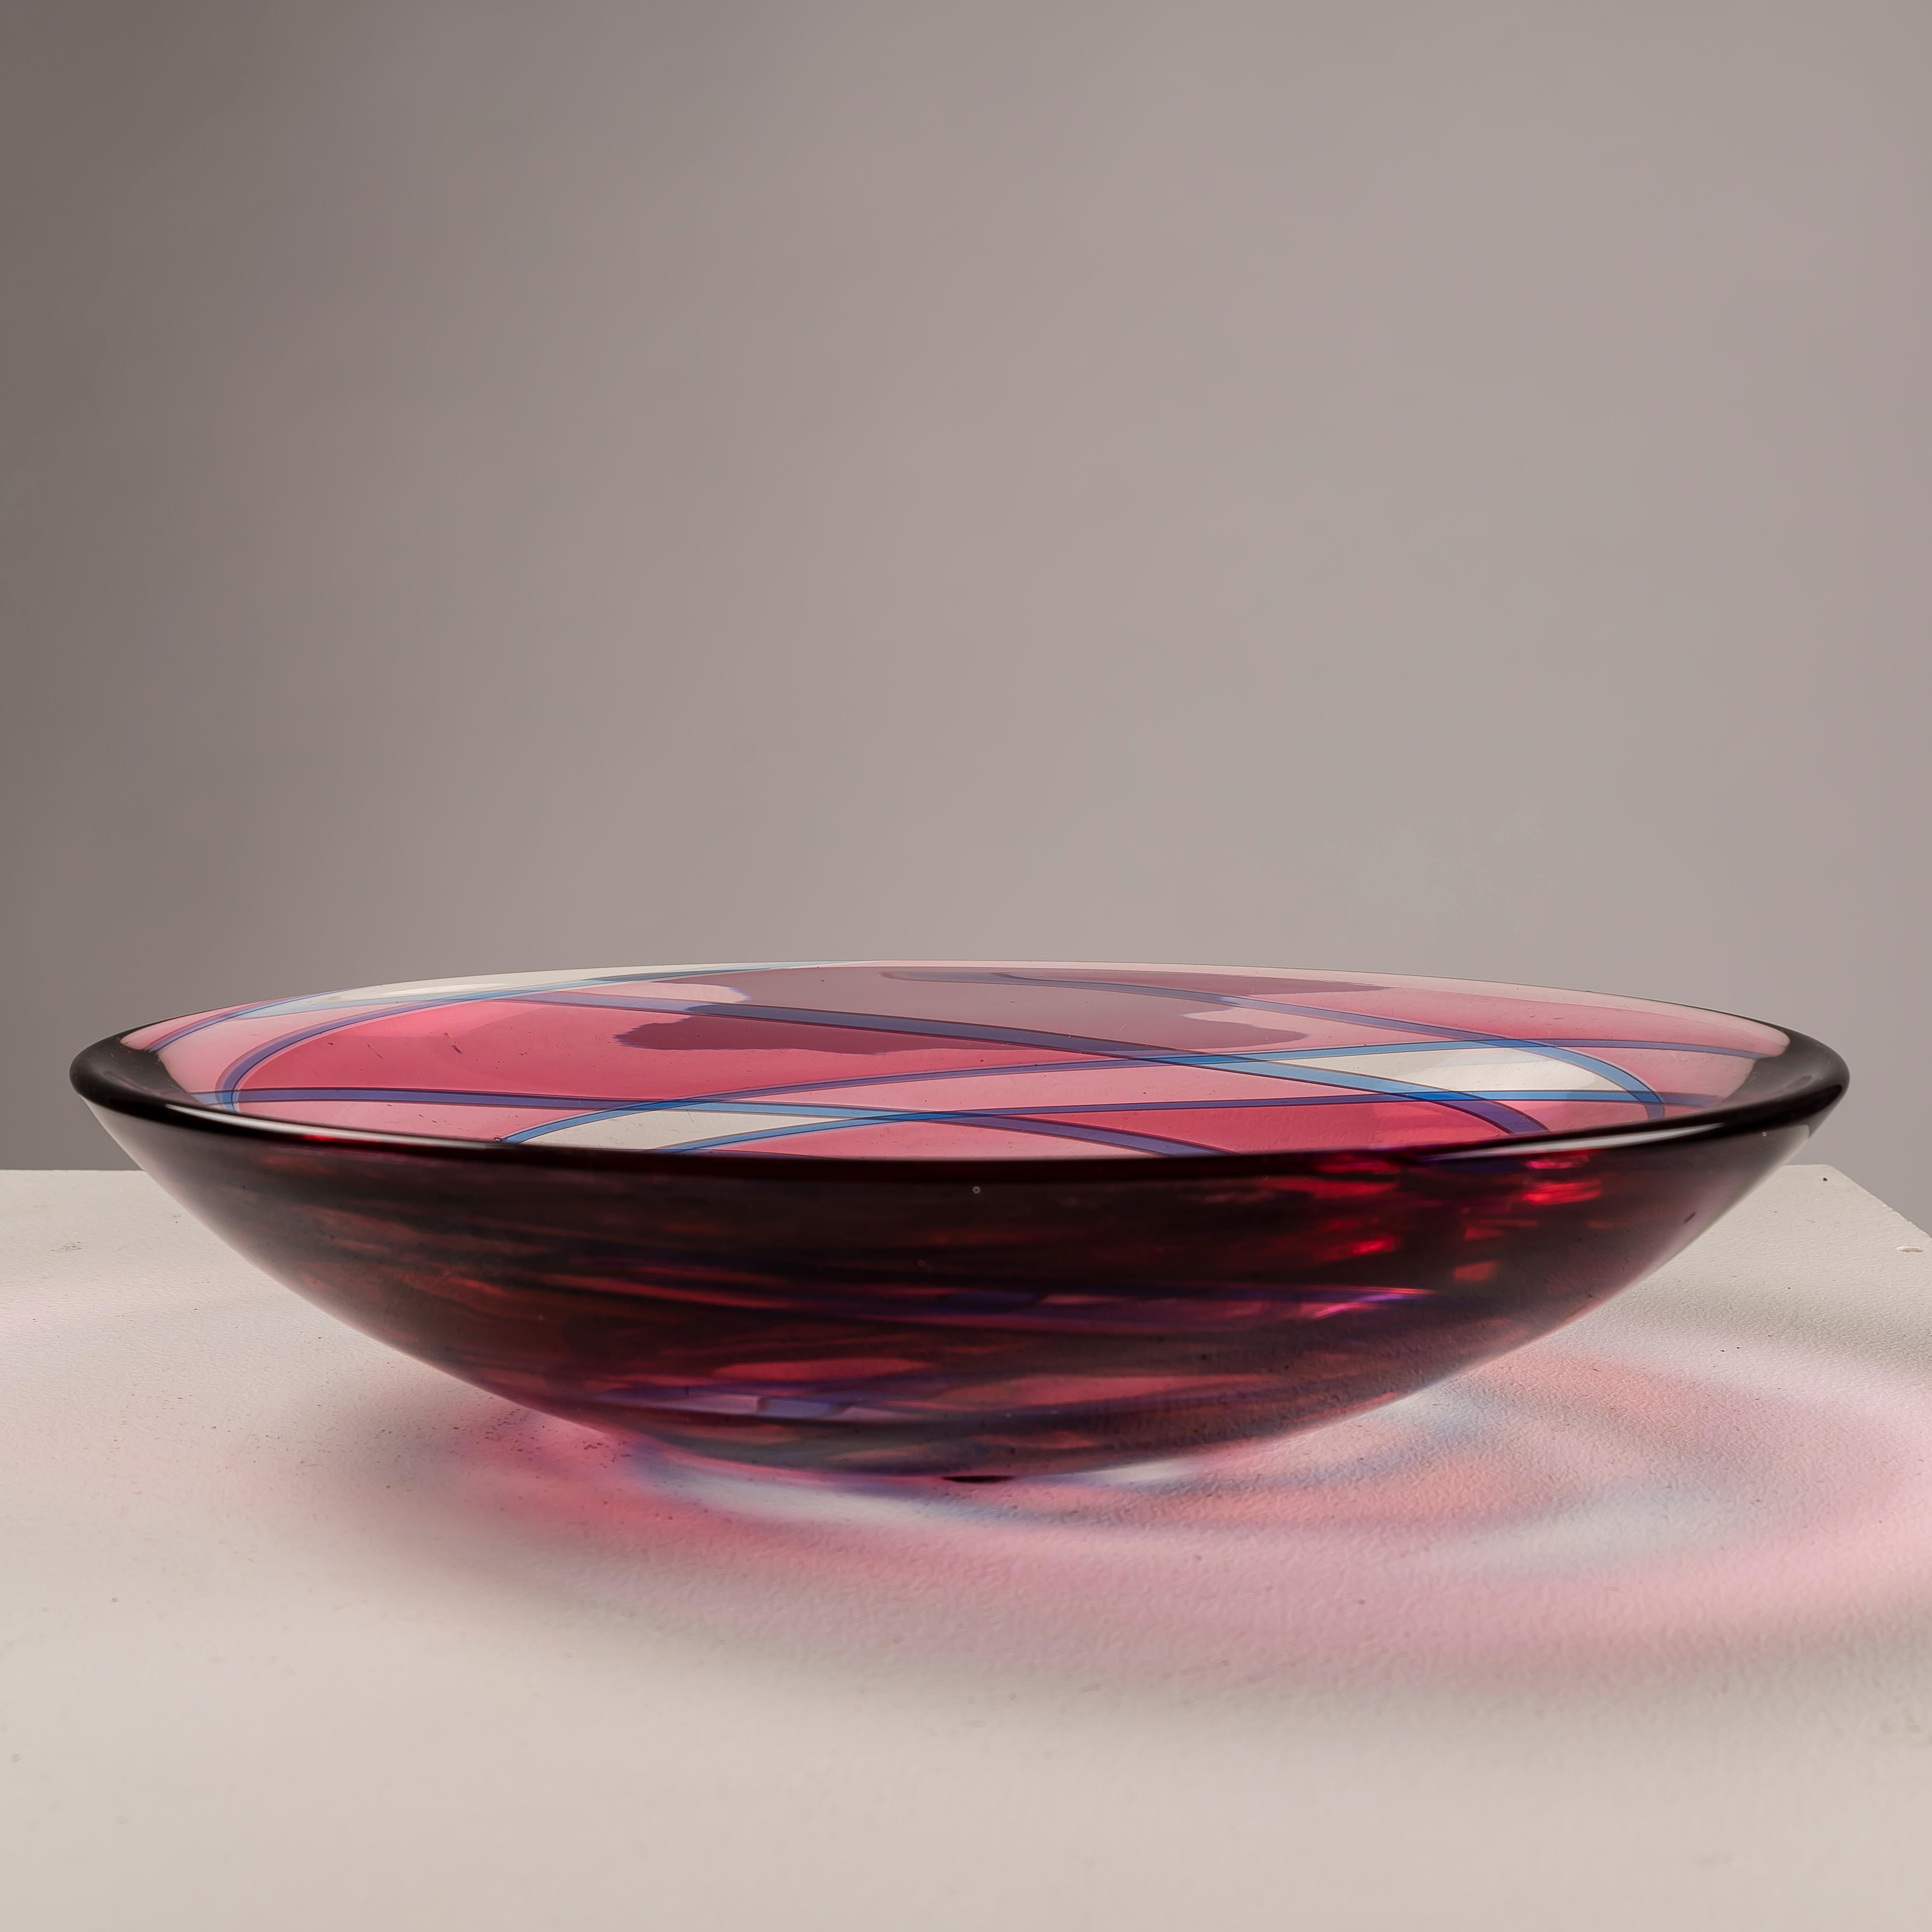 Immerse yourself in the mesmerizing beauty of Murano glass artistry with the geometric pink and blue glass bowl crafted by Archimede Seguso in the 1960s. This exquisite piece epitomizes the unparalleled craftsmanship and artistic innovation for